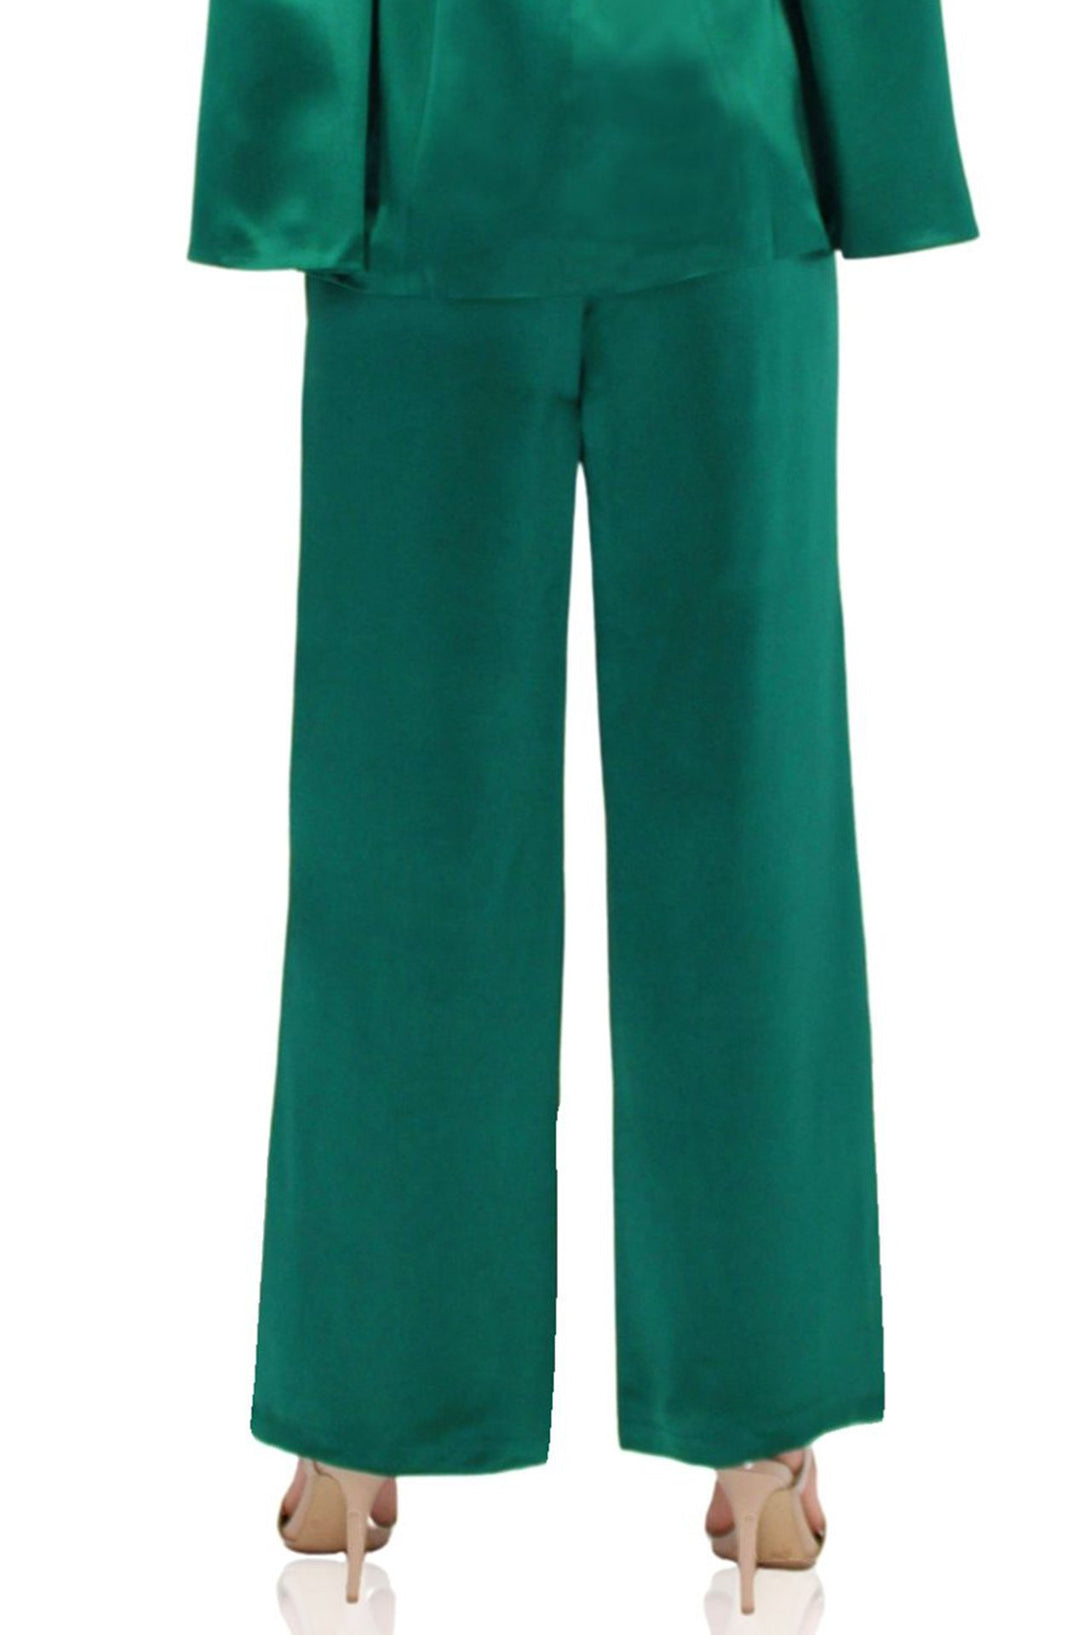 Kyle-Designer-Straight-Fit-Womens-Pants-In-Green